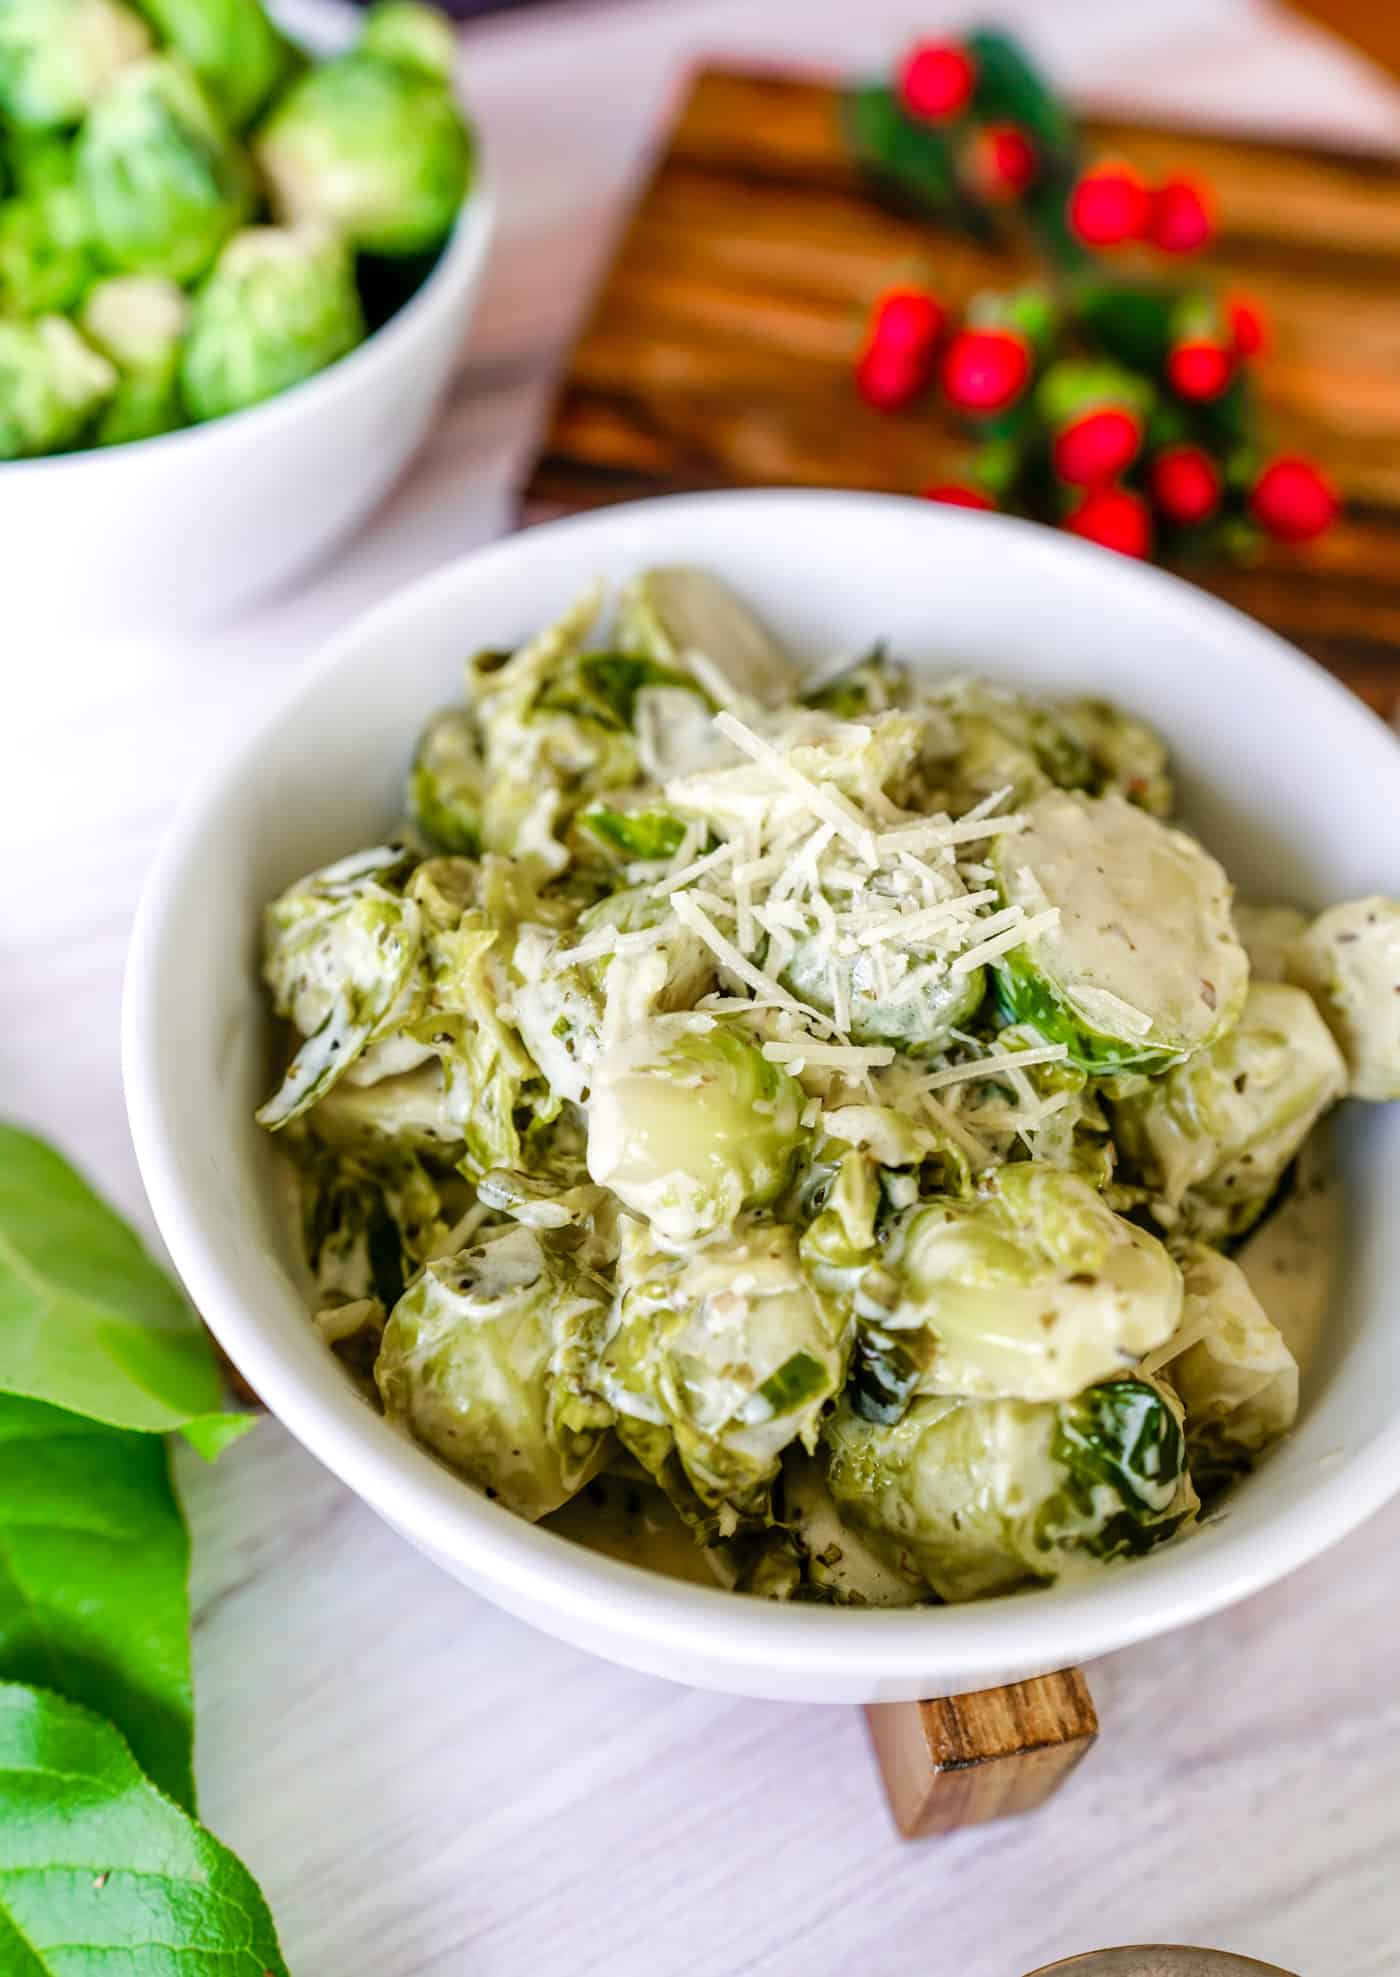 Instant Pot Creamy Parmesan Garlic Brussel Sprouts